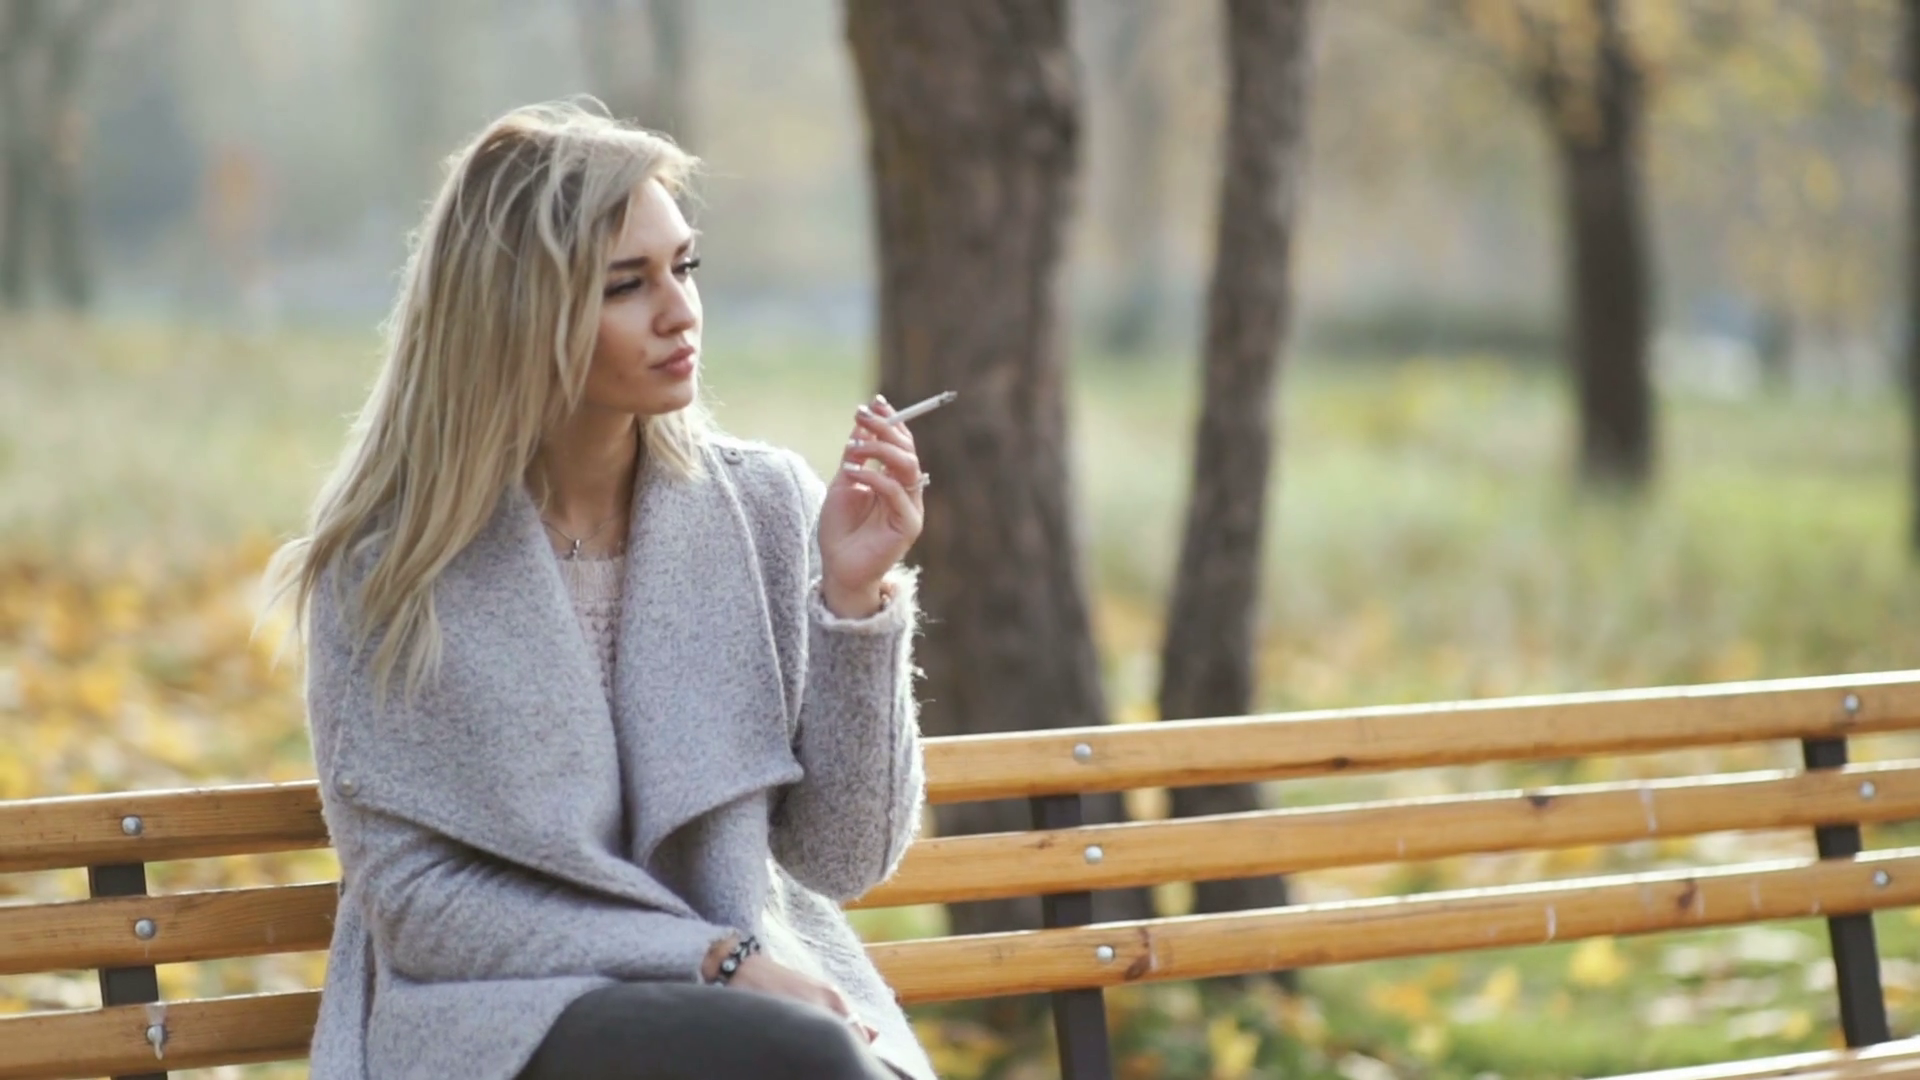 videoblocks-young-beautiful-business-woman-smoking-a-cigarette-in-the-park-autumn-background_h...png